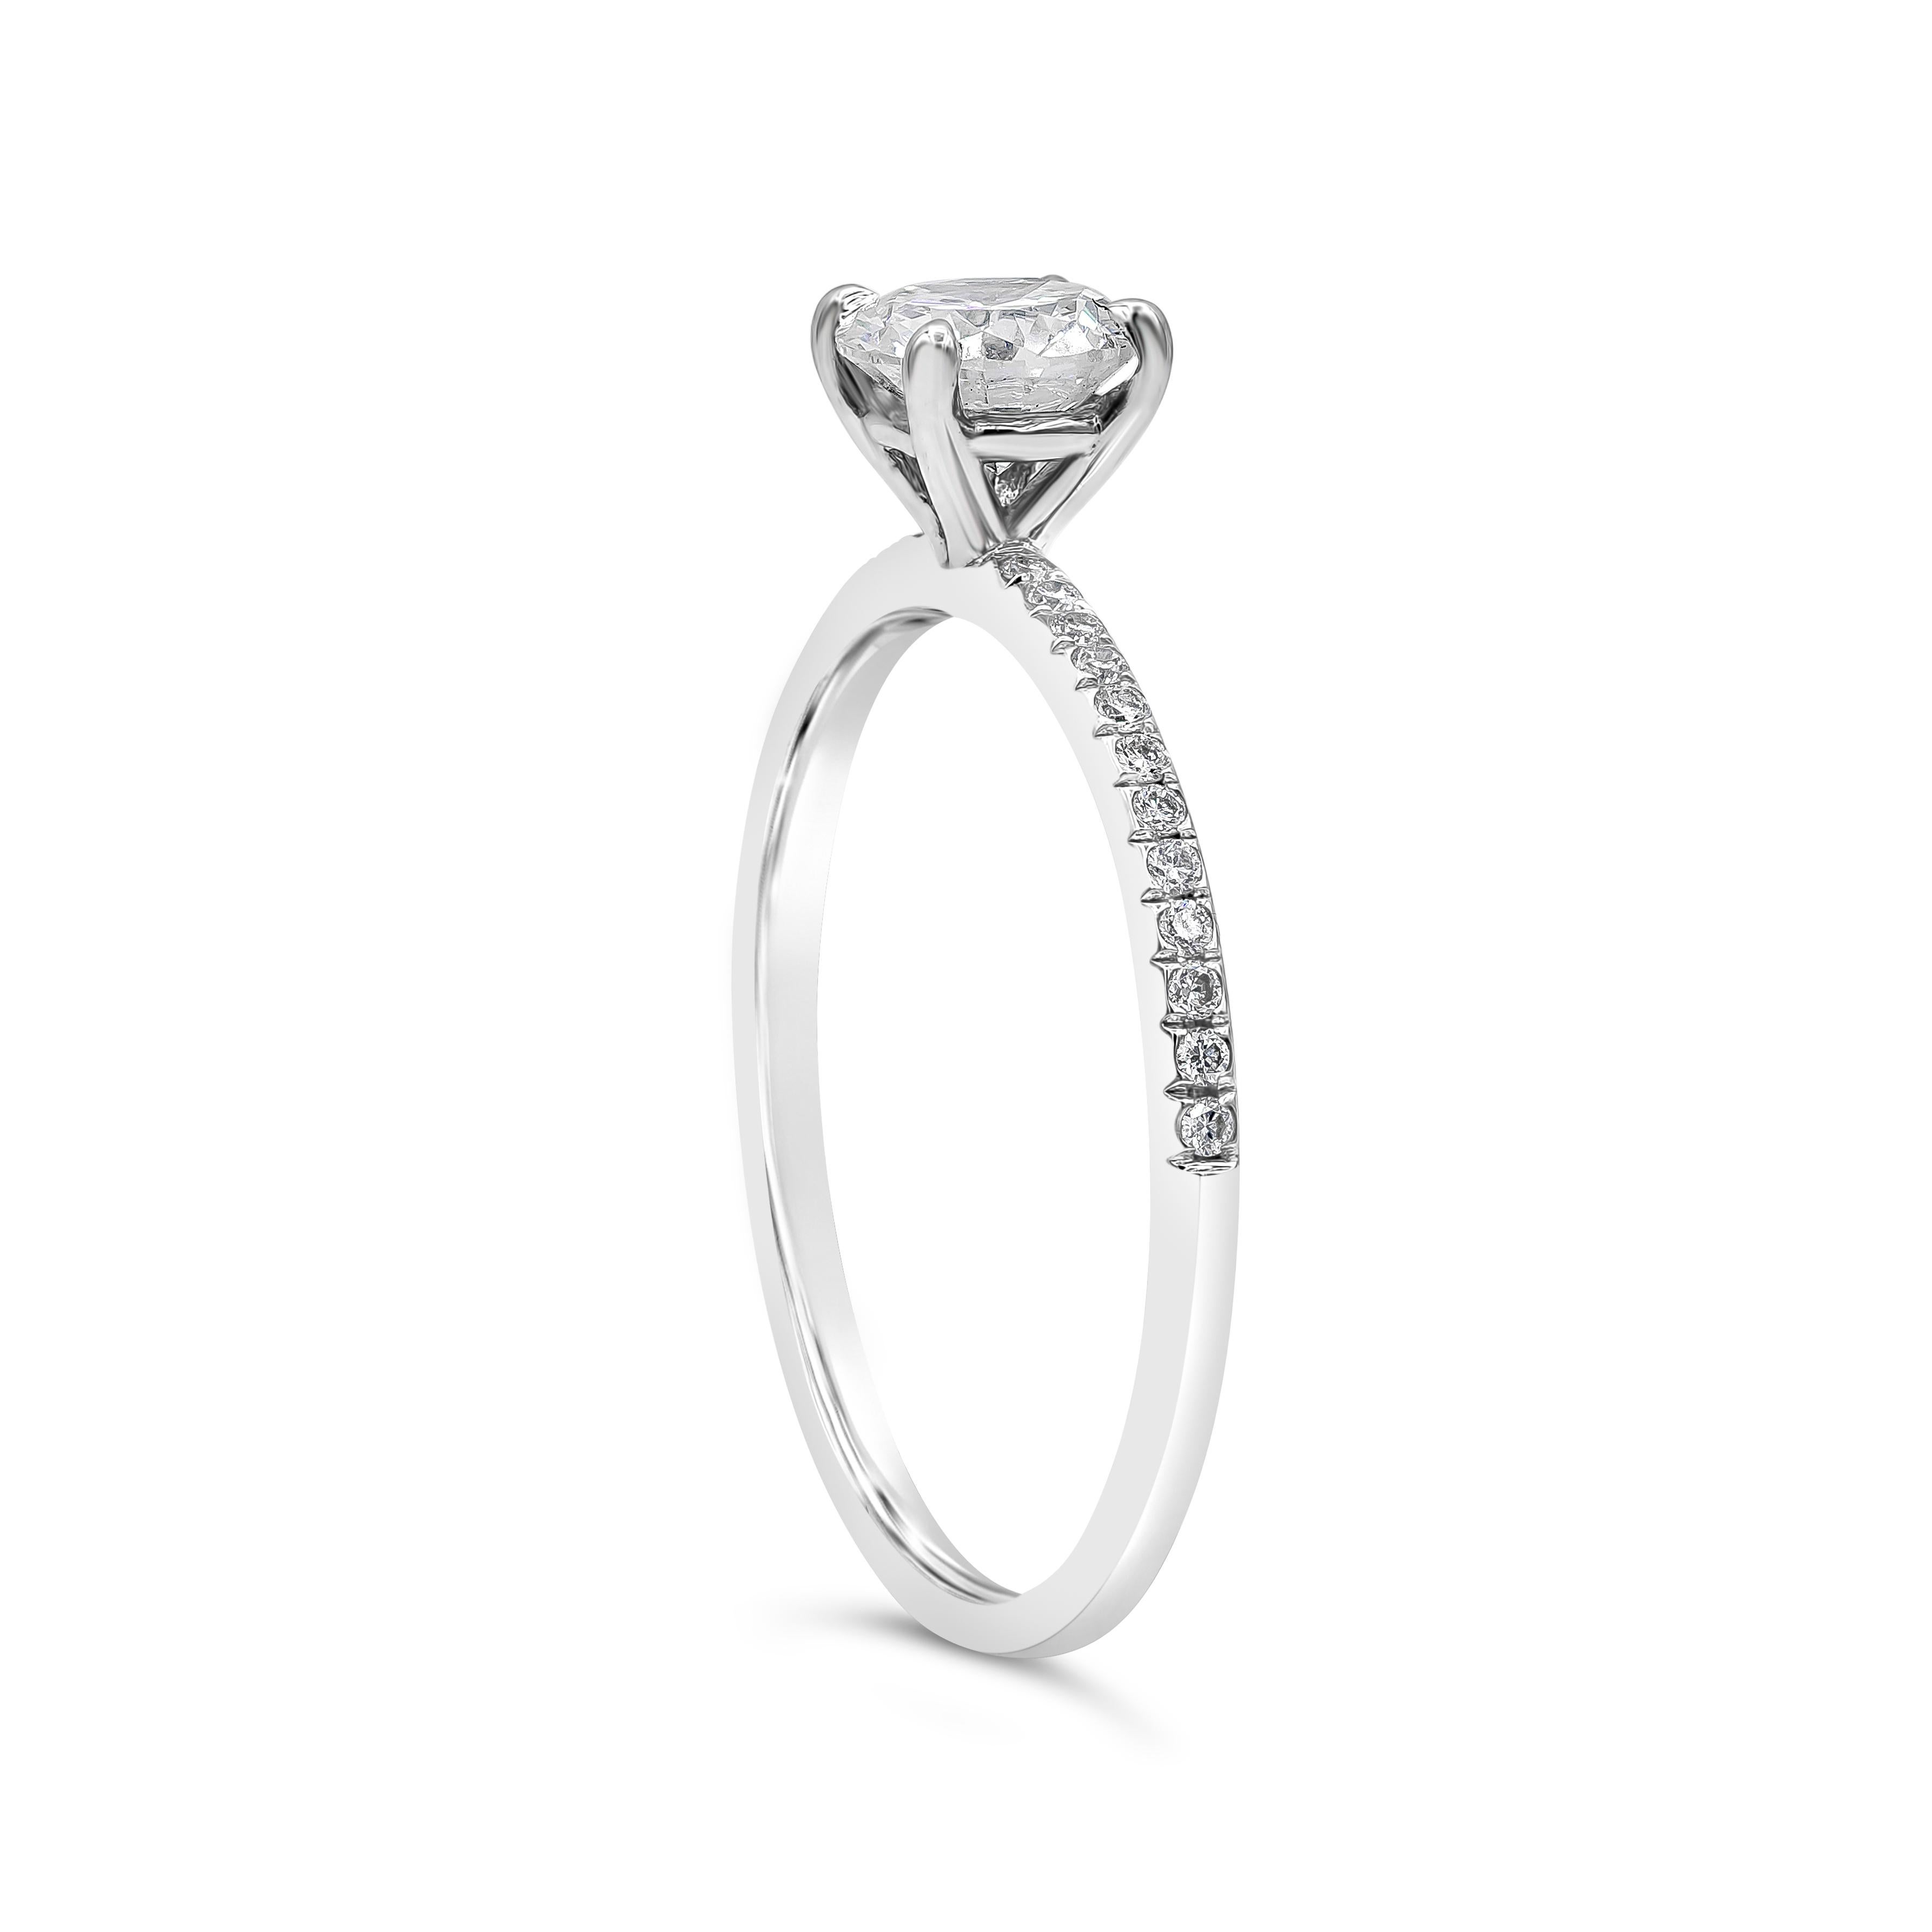 A classic engagement ring style showcasing a 0.58 carat round diamond, certified by EGL USA as F color, SI2 clarity. Set in a diamond encrusted mounting made in 18 karat white gold. Size 6.5 US (Sizable upon request).

Style available in different